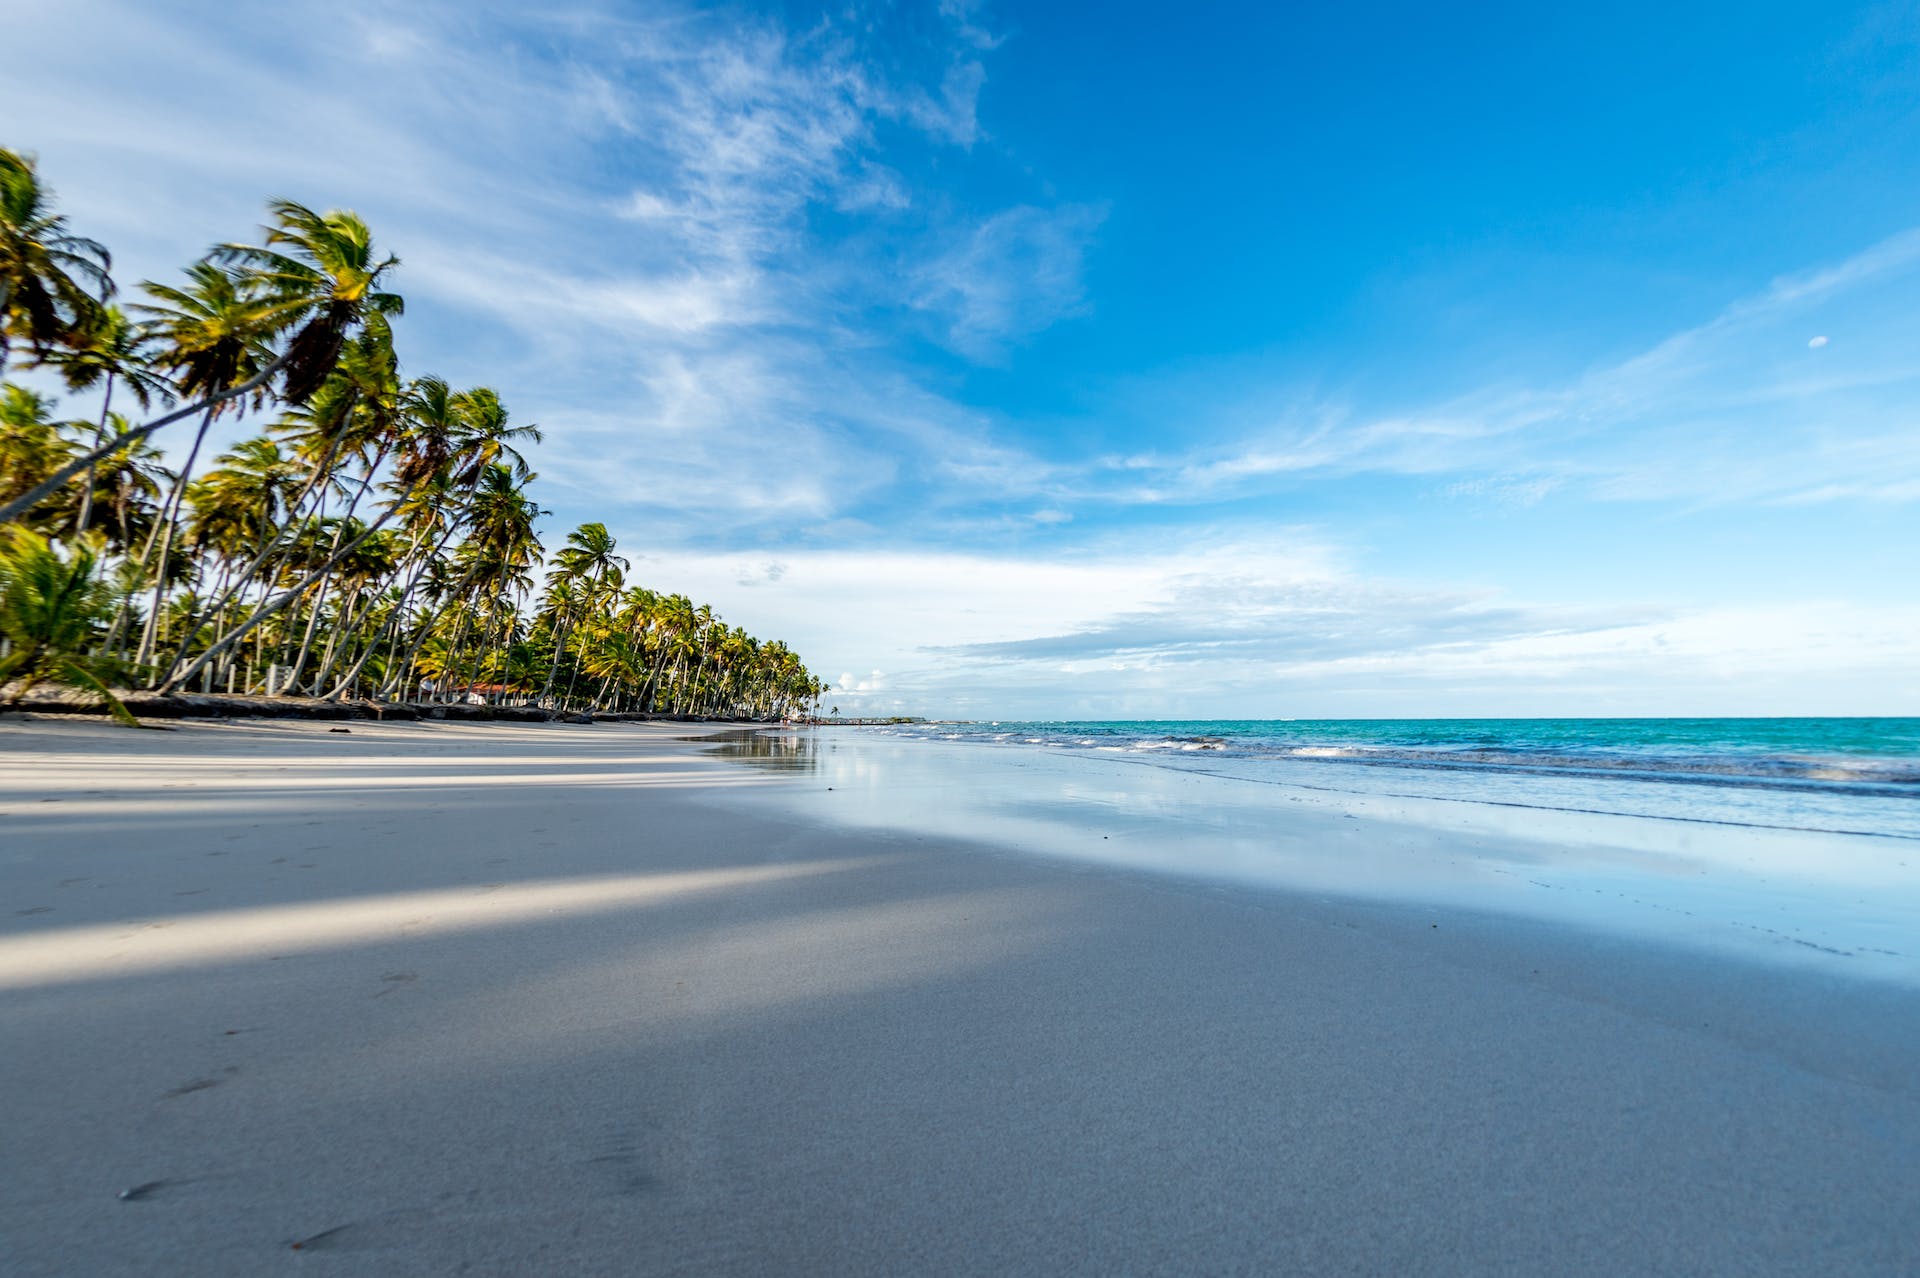 An empty beach with palm trees | Source: Pexels